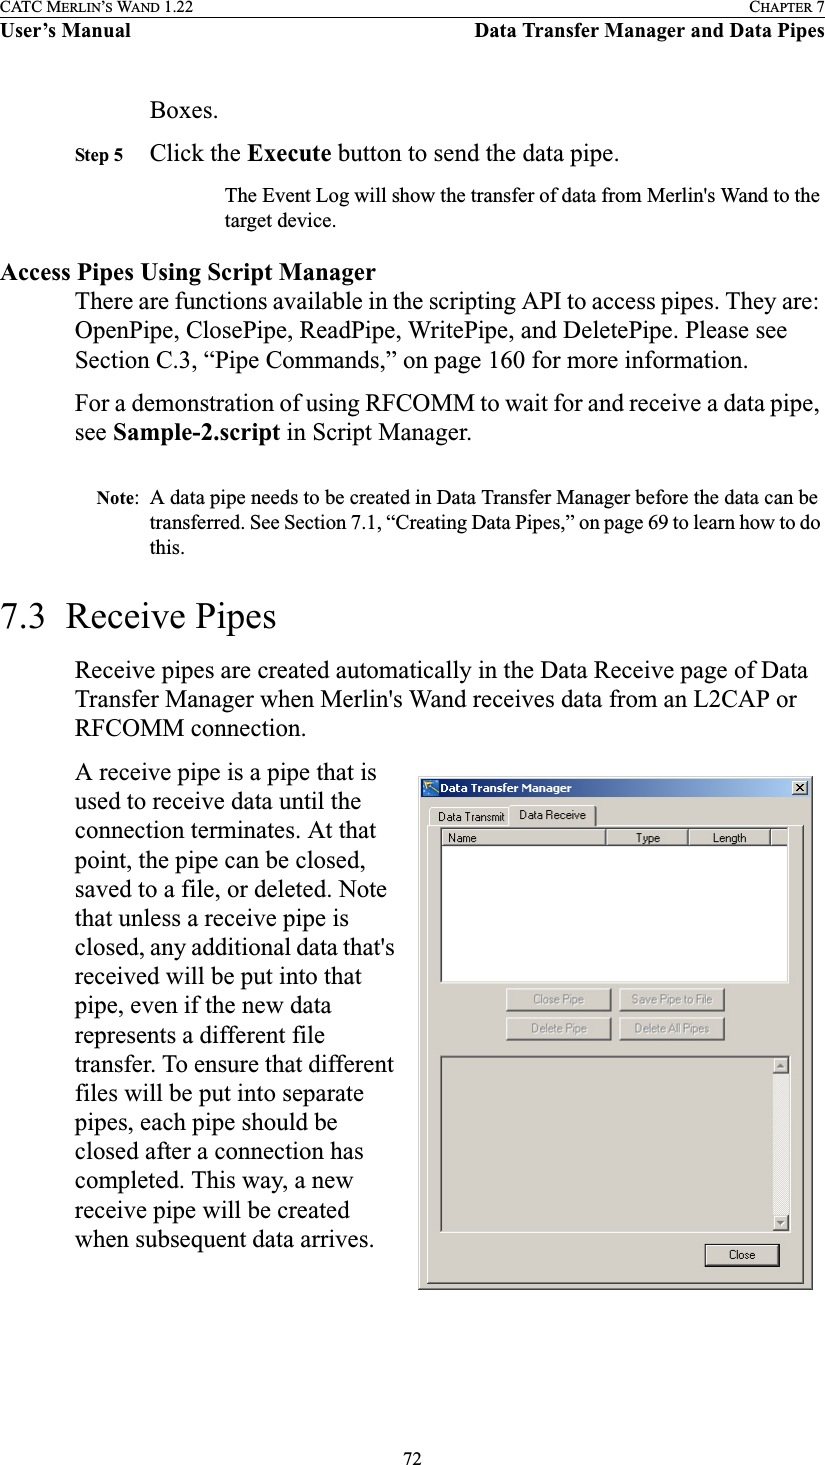 72CATC MERLIN’S WAND 1.22 CHAPTER 7User’s Manual Data Transfer Manager and Data PipesBoxes.Step 5 Click the Execute button to send the data pipe.The Event Log will show the transfer of data from Merlin&apos;s Wand to the target device.Access Pipes Using Script ManagerThere are functions available in the scripting API to access pipes. They are: OpenPipe, ClosePipe, ReadPipe, WritePipe, and DeletePipe. Please see Section C.3, “Pipe Commands,” on page 160 for more information.For a demonstration of using RFCOMM to wait for and receive a data pipe, see Sample-2.script in Script Manager. Note: A data pipe needs to be created in Data Transfer Manager before the data can be transferred. See Section 7.1, “Creating Data Pipes,” on page 69 to learn how to do this.7.3  Receive PipesReceive pipes are created automatically in the Data Receive page of Data Transfer Manager when Merlin&apos;s Wand receives data from an L2CAP or RFCOMM connection.A receive pipe is a pipe that is used to receive data until the connection terminates. At that point, the pipe can be closed, saved to a file, or deleted. Note that unless a receive pipe is closed, any additional data that&apos;s received will be put into that pipe, even if the new data represents a different file transfer. To ensure that different files will be put into separate pipes, each pipe should be closed after a connection has completed. This way, a new receive pipe will be created when subsequent data arrives.